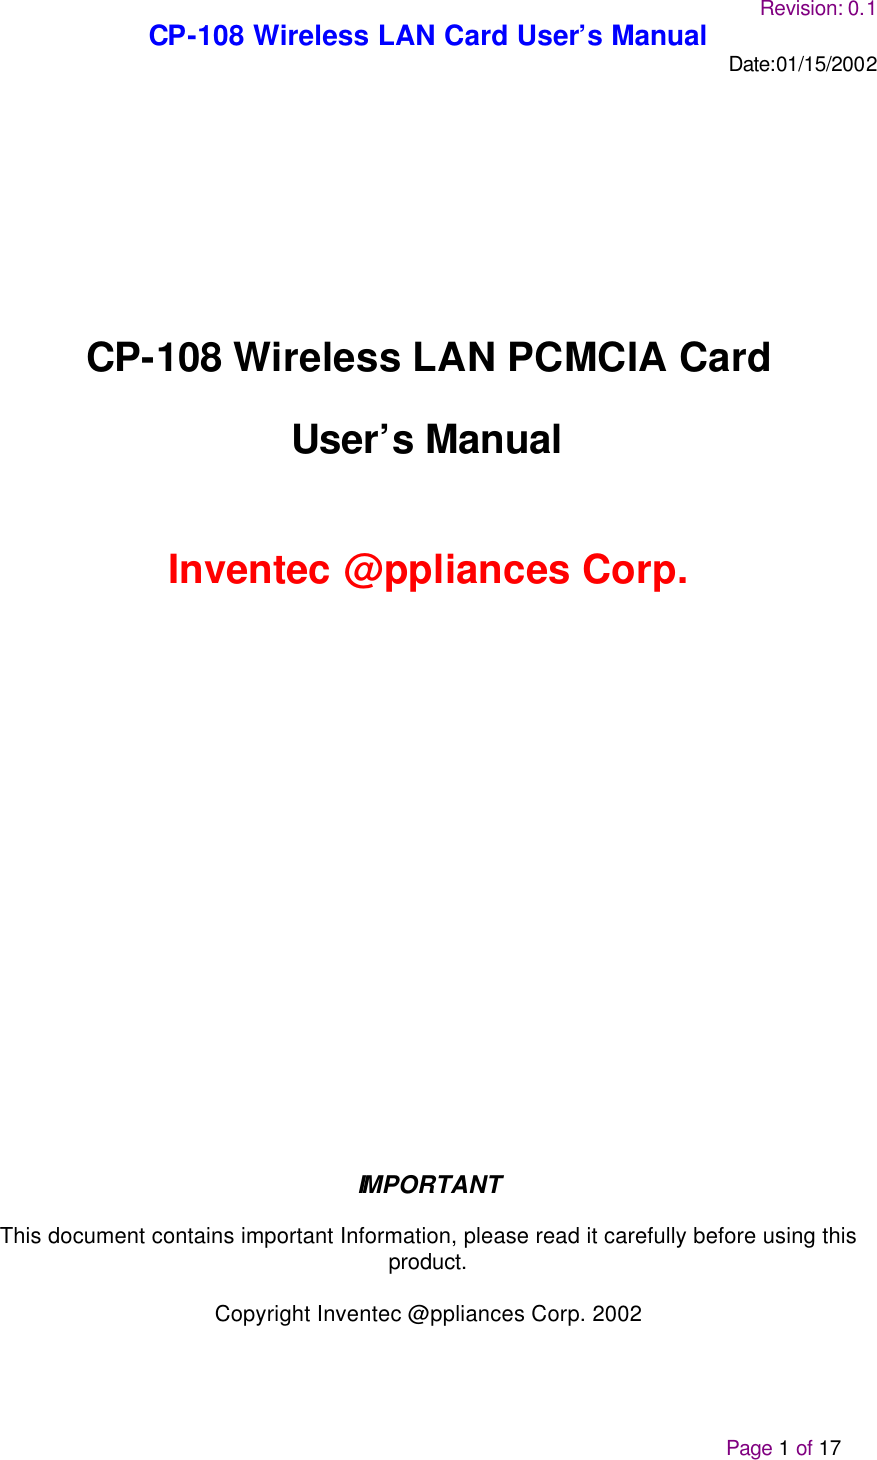 Revision: 0.1 CP-108 Wireless LAN Card User’s Manual Date:01/15/2002                                                                                                                                                                                              Page 1 of 17   CP-108 Wireless LAN PCMCIA Card  User’s Manual    Inventec @ppliances Corp.       IMPORTANT  This document contains important Information, please read it carefully before using this product.  Copyright Inventec @ppliances Corp. 2002 